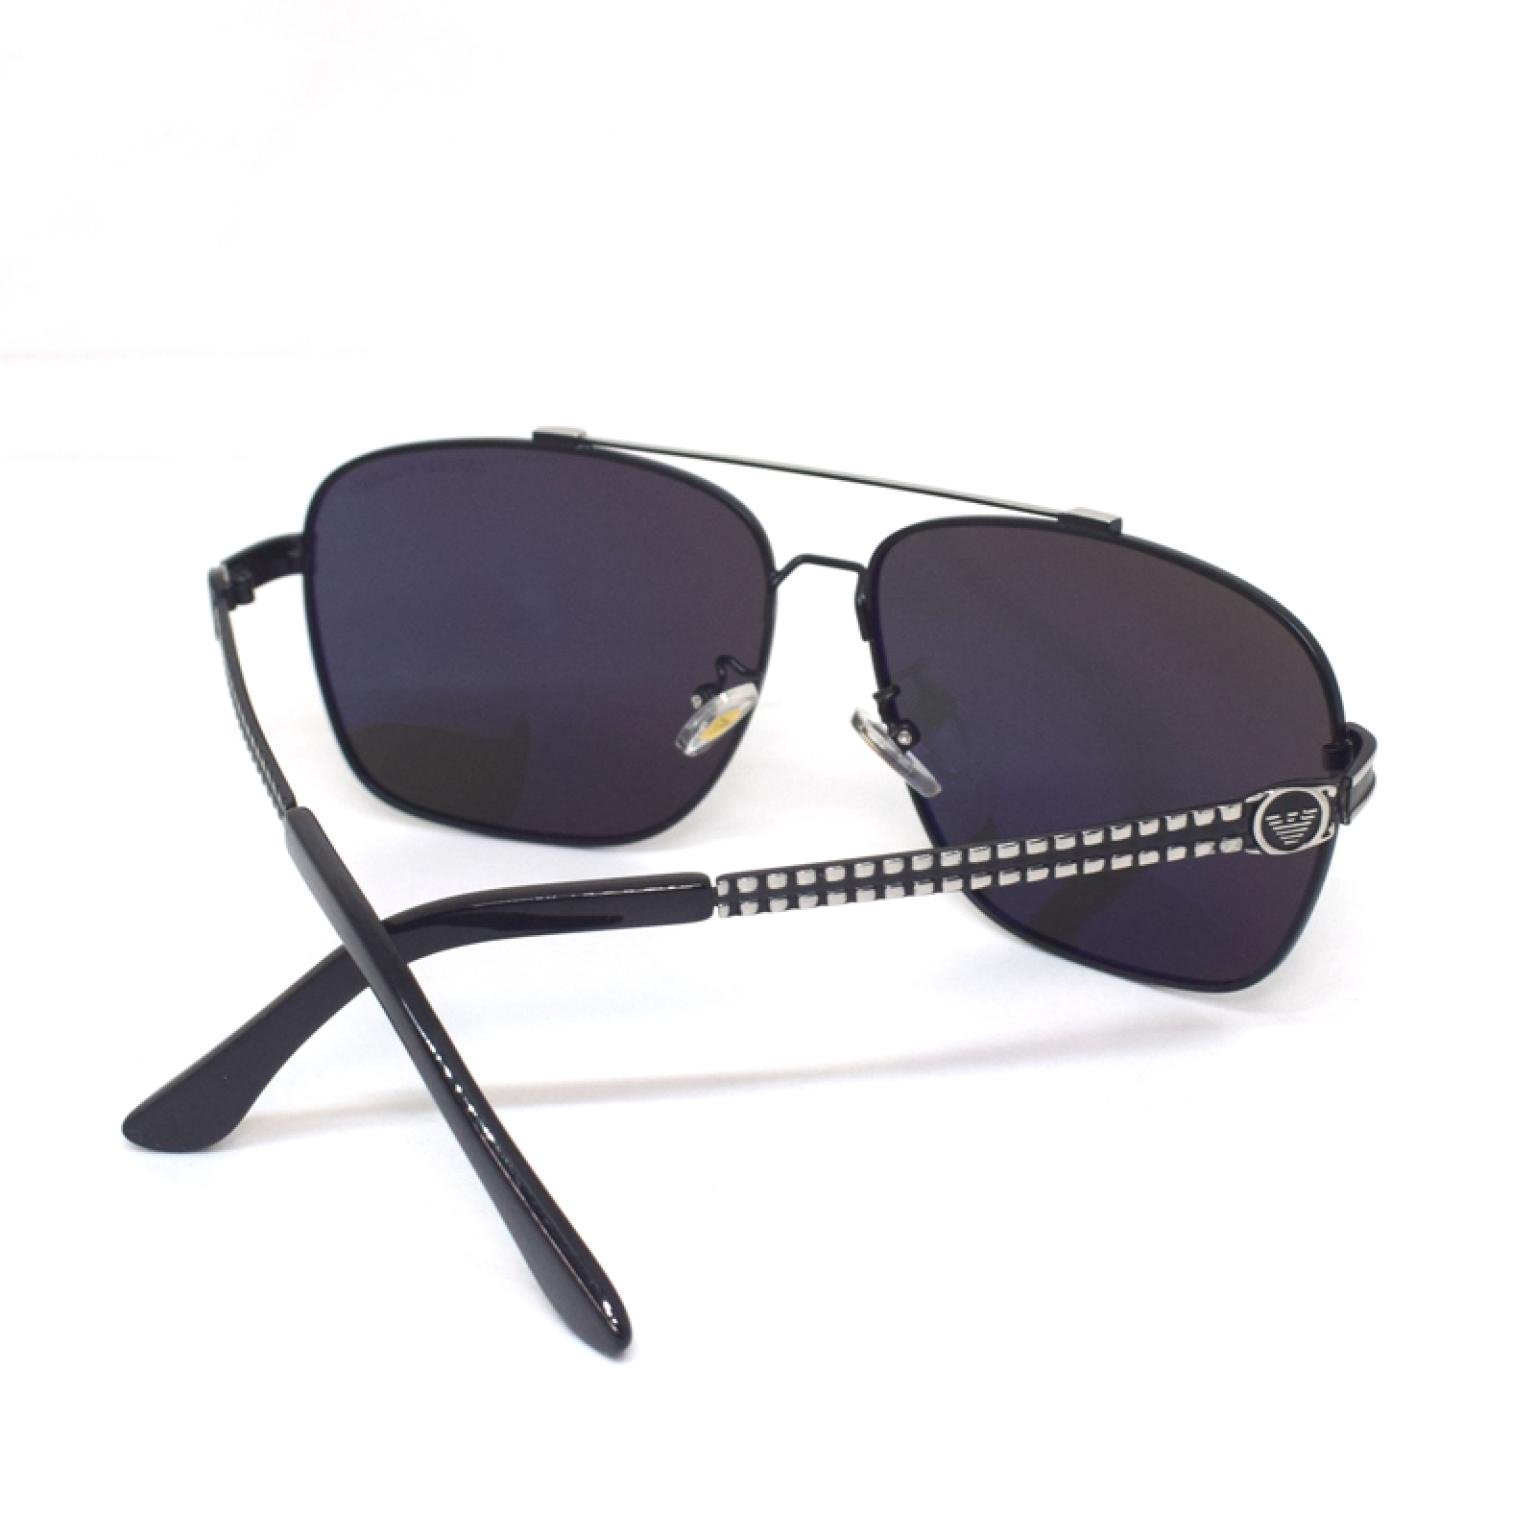 High Quality Polarized Sunglasses With Metal Body For Men's Driving Fashion